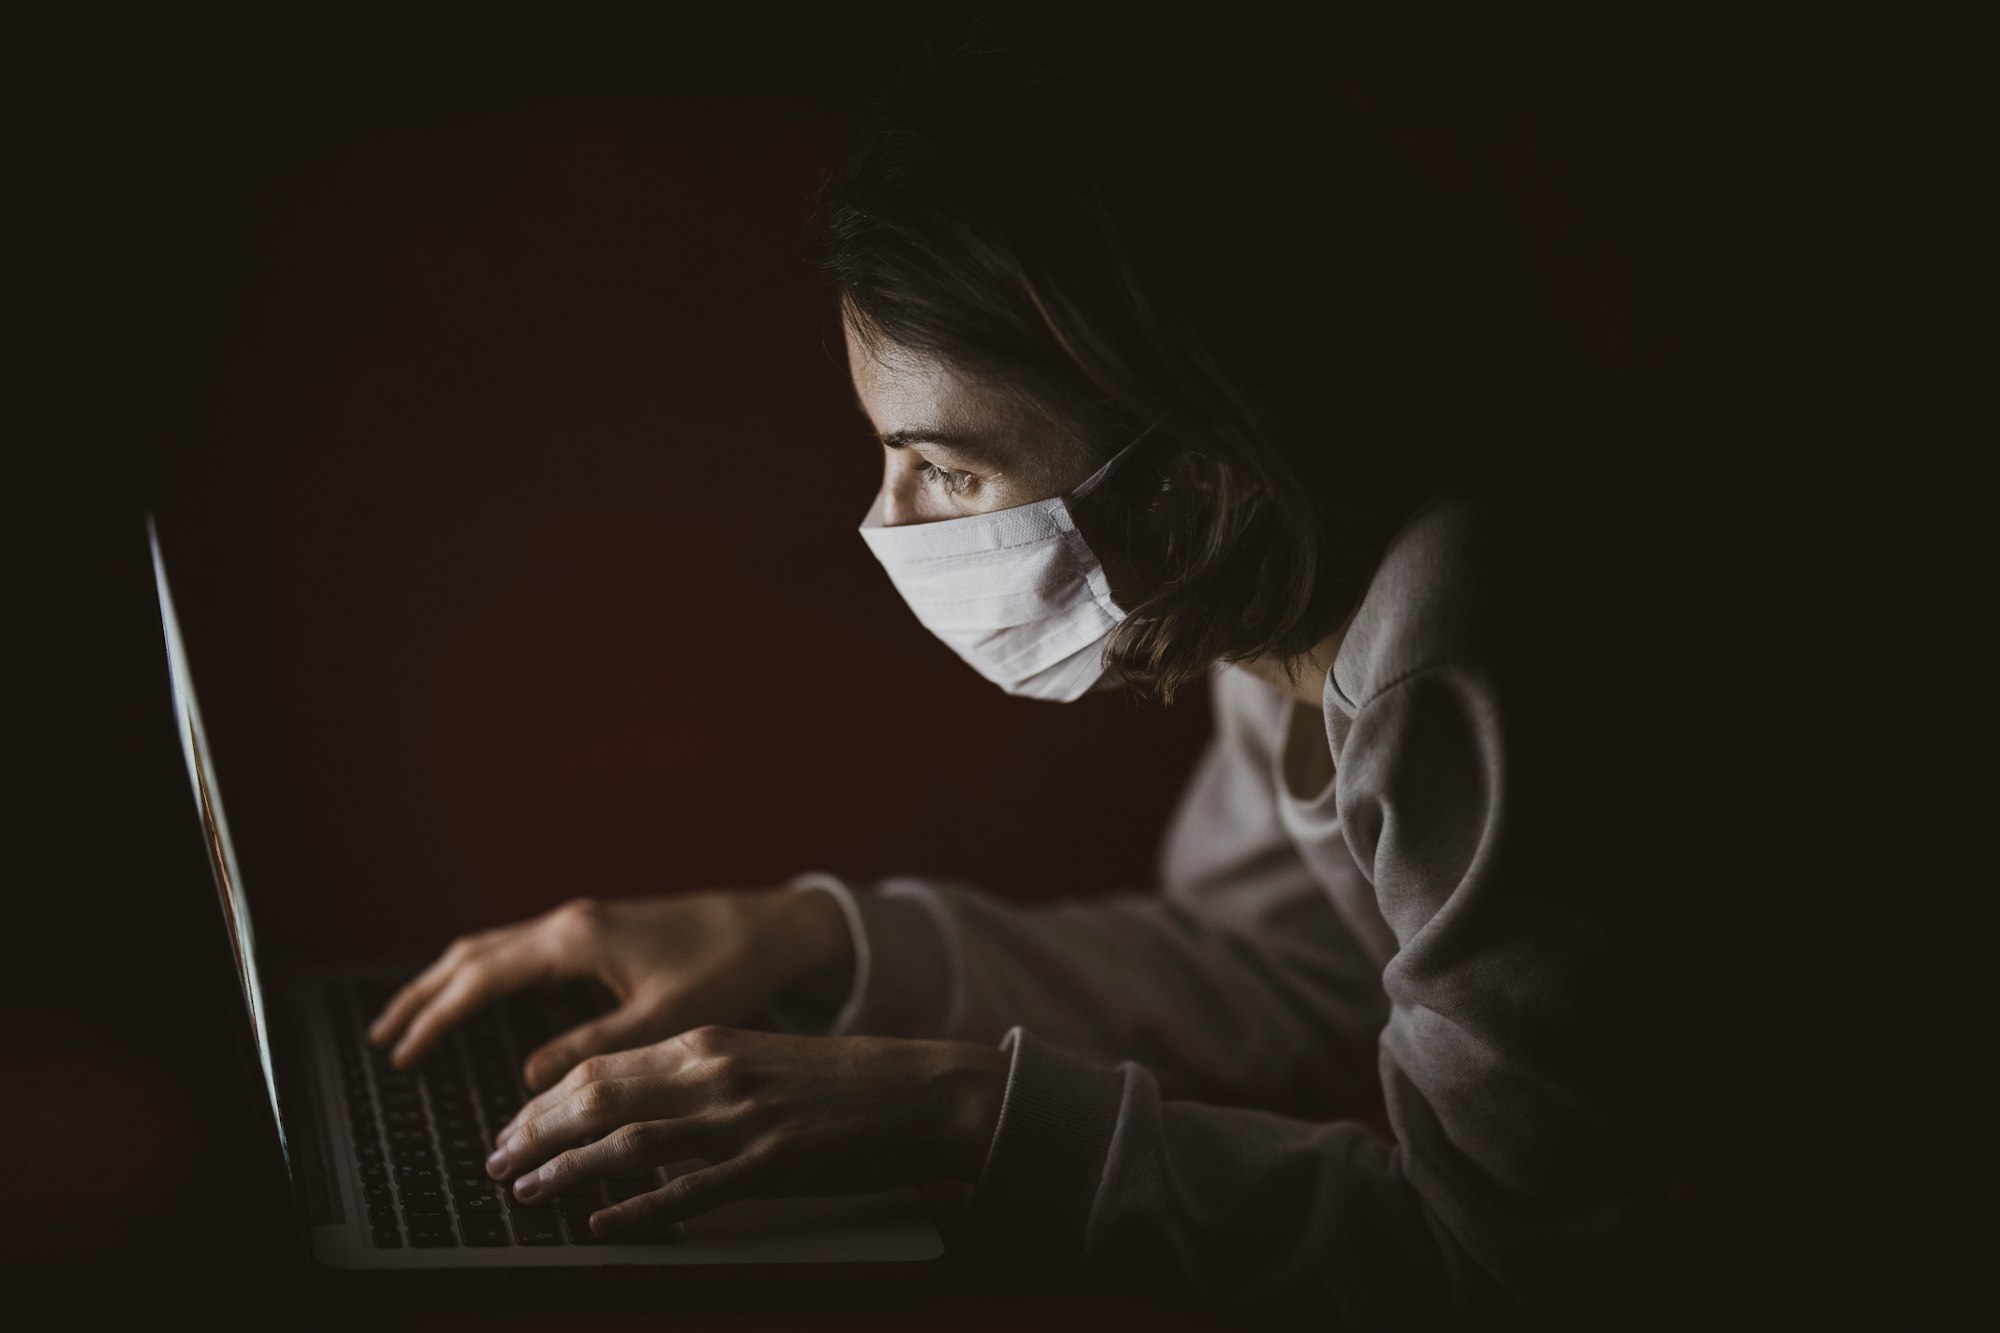 The online security risks of the COVID-19 pandemic